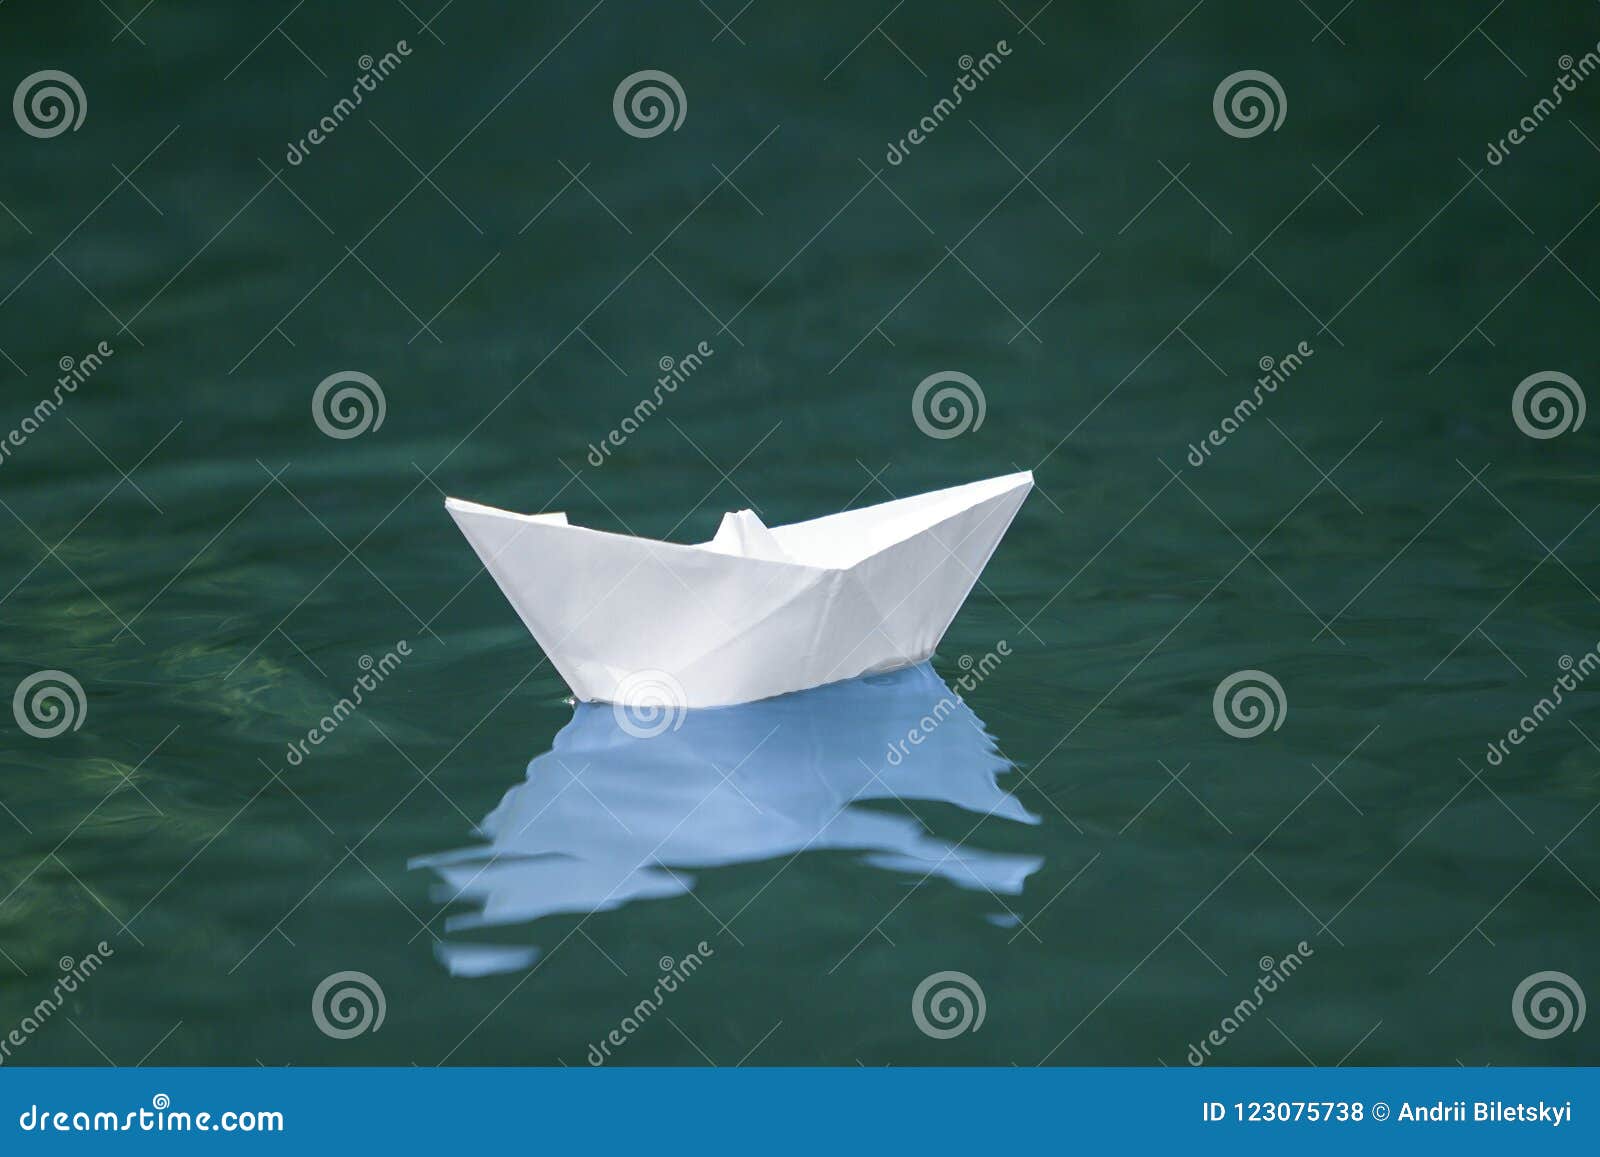 Close-up Of Simple Small White Origami Paper Boat Floating ...